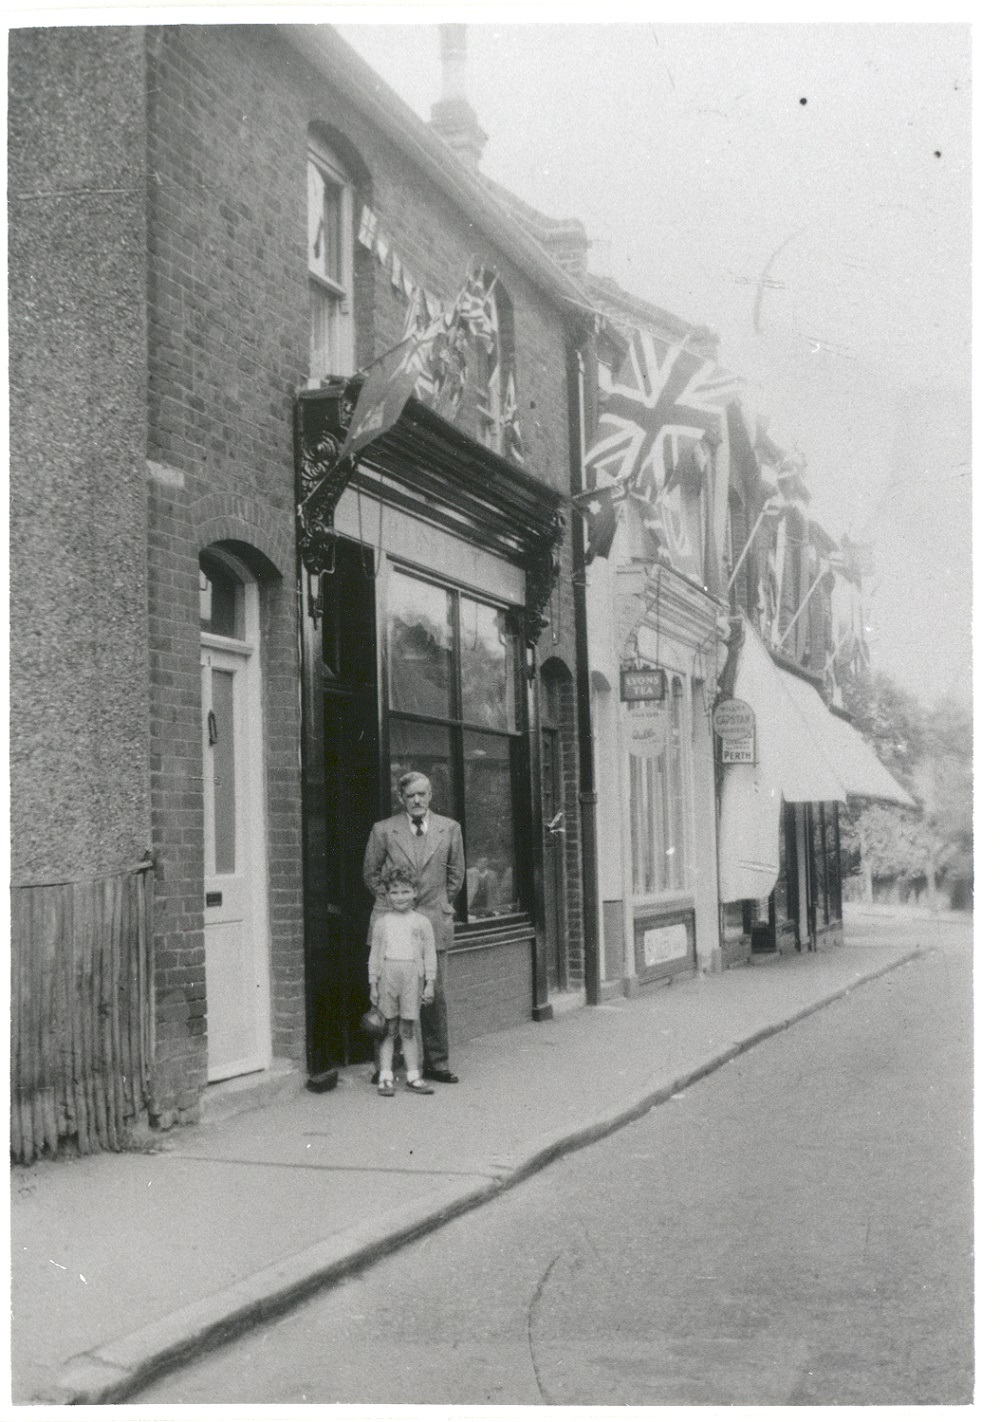 Henry Hibbert (b.1884, d.1975) and grandson, Charles Hibbert, outside Hibbert's greengrocers, Claygate, during the coronation of Queen Elizabeth II, June 1953